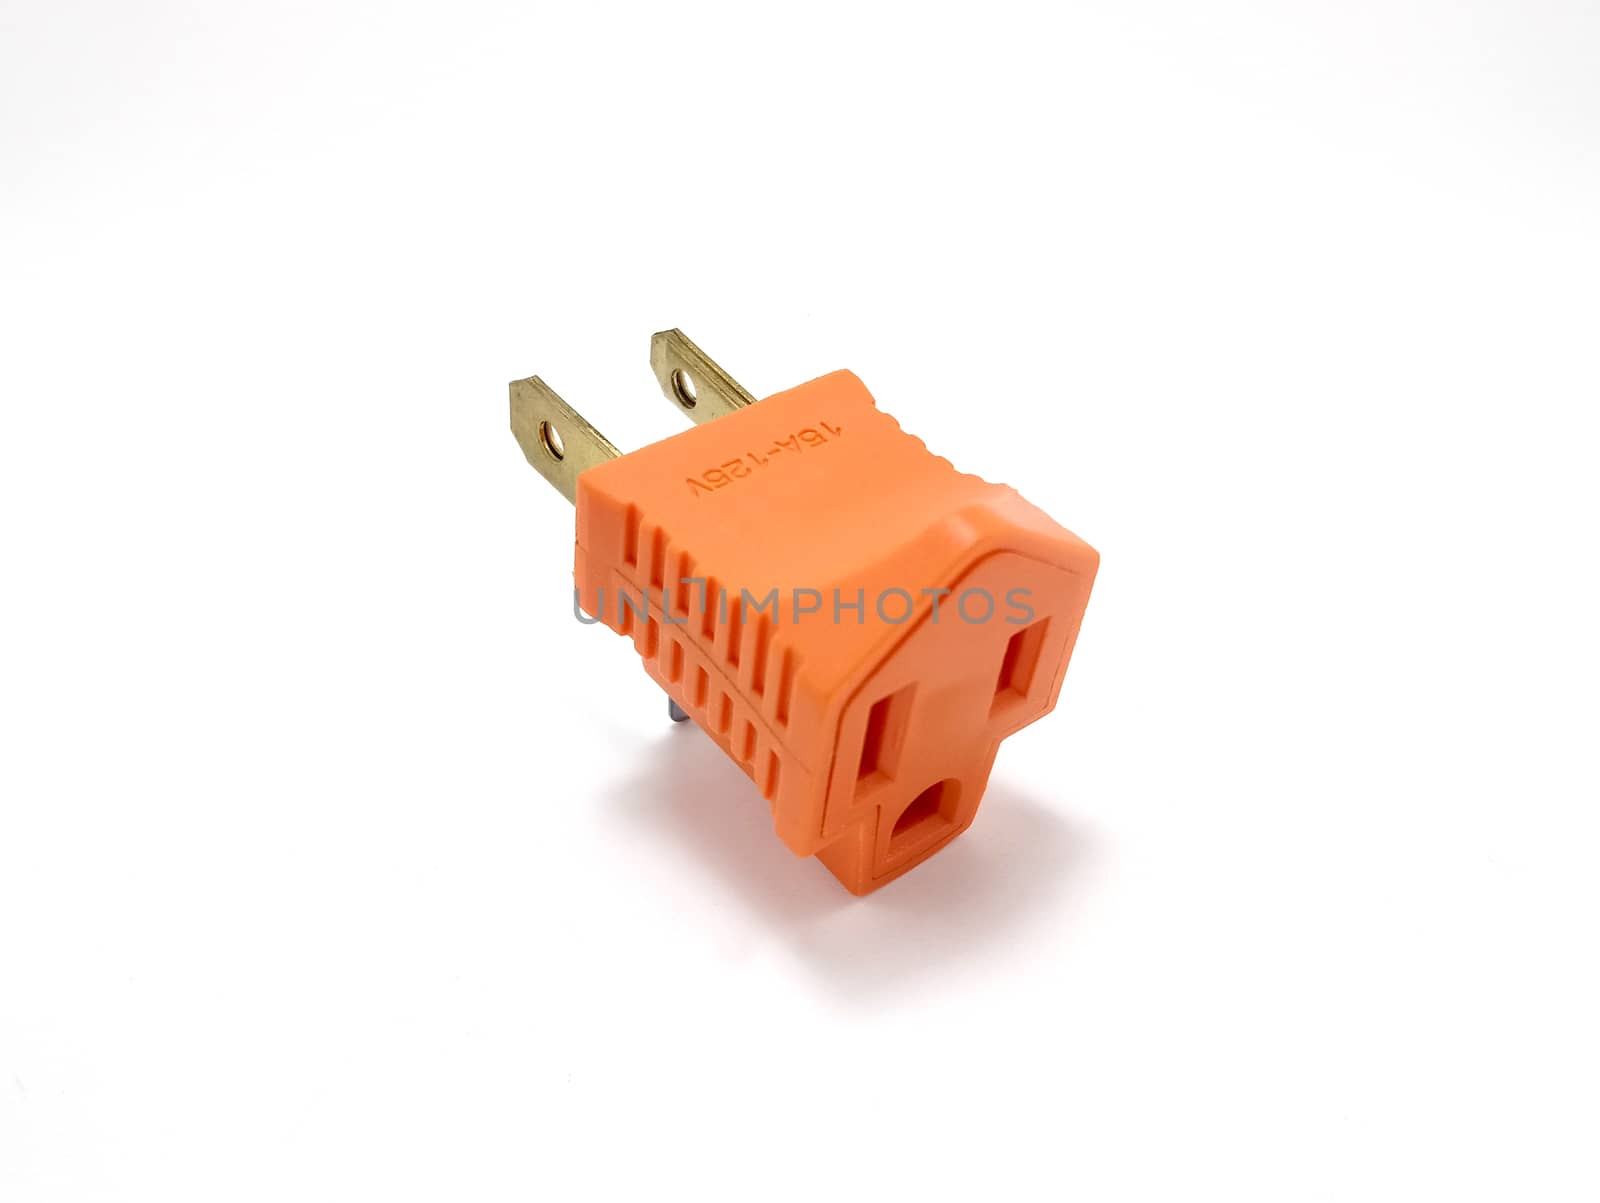 Orange two prong electrical plug by imwaltersy